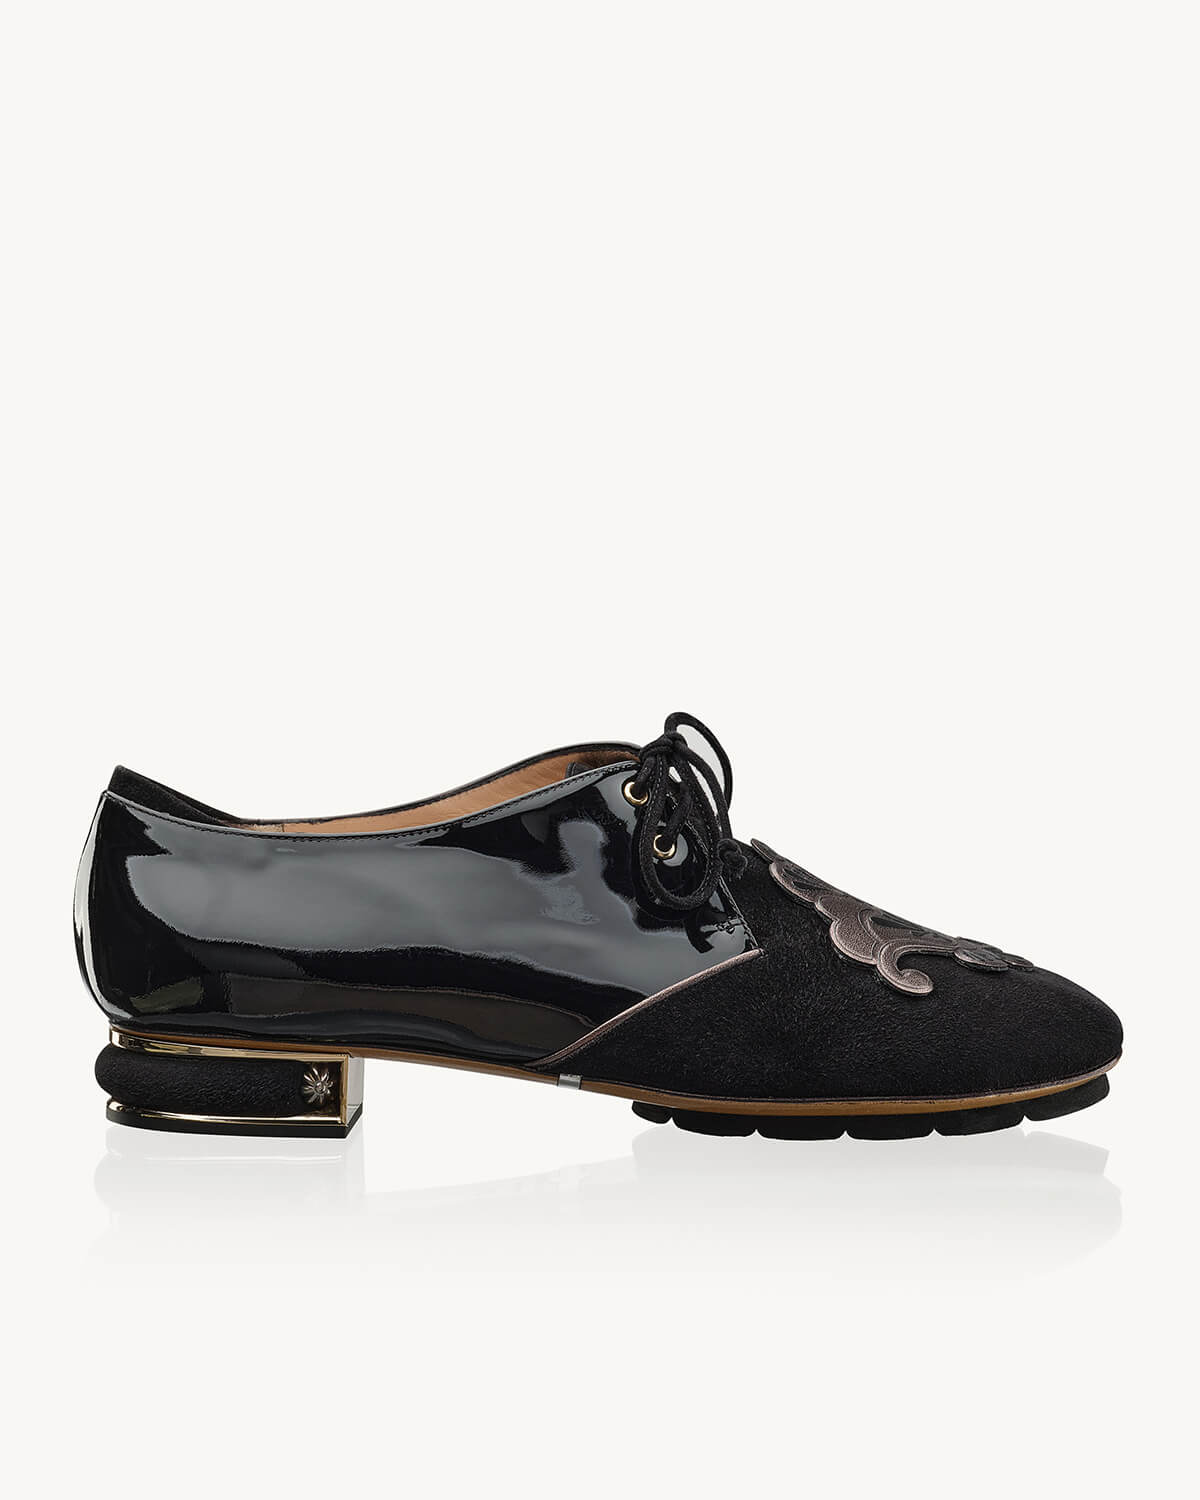 Blix 20 heel derby in black suede and patent leather with decoration in gunmetal nappa Francesco Lanzoni Shoes